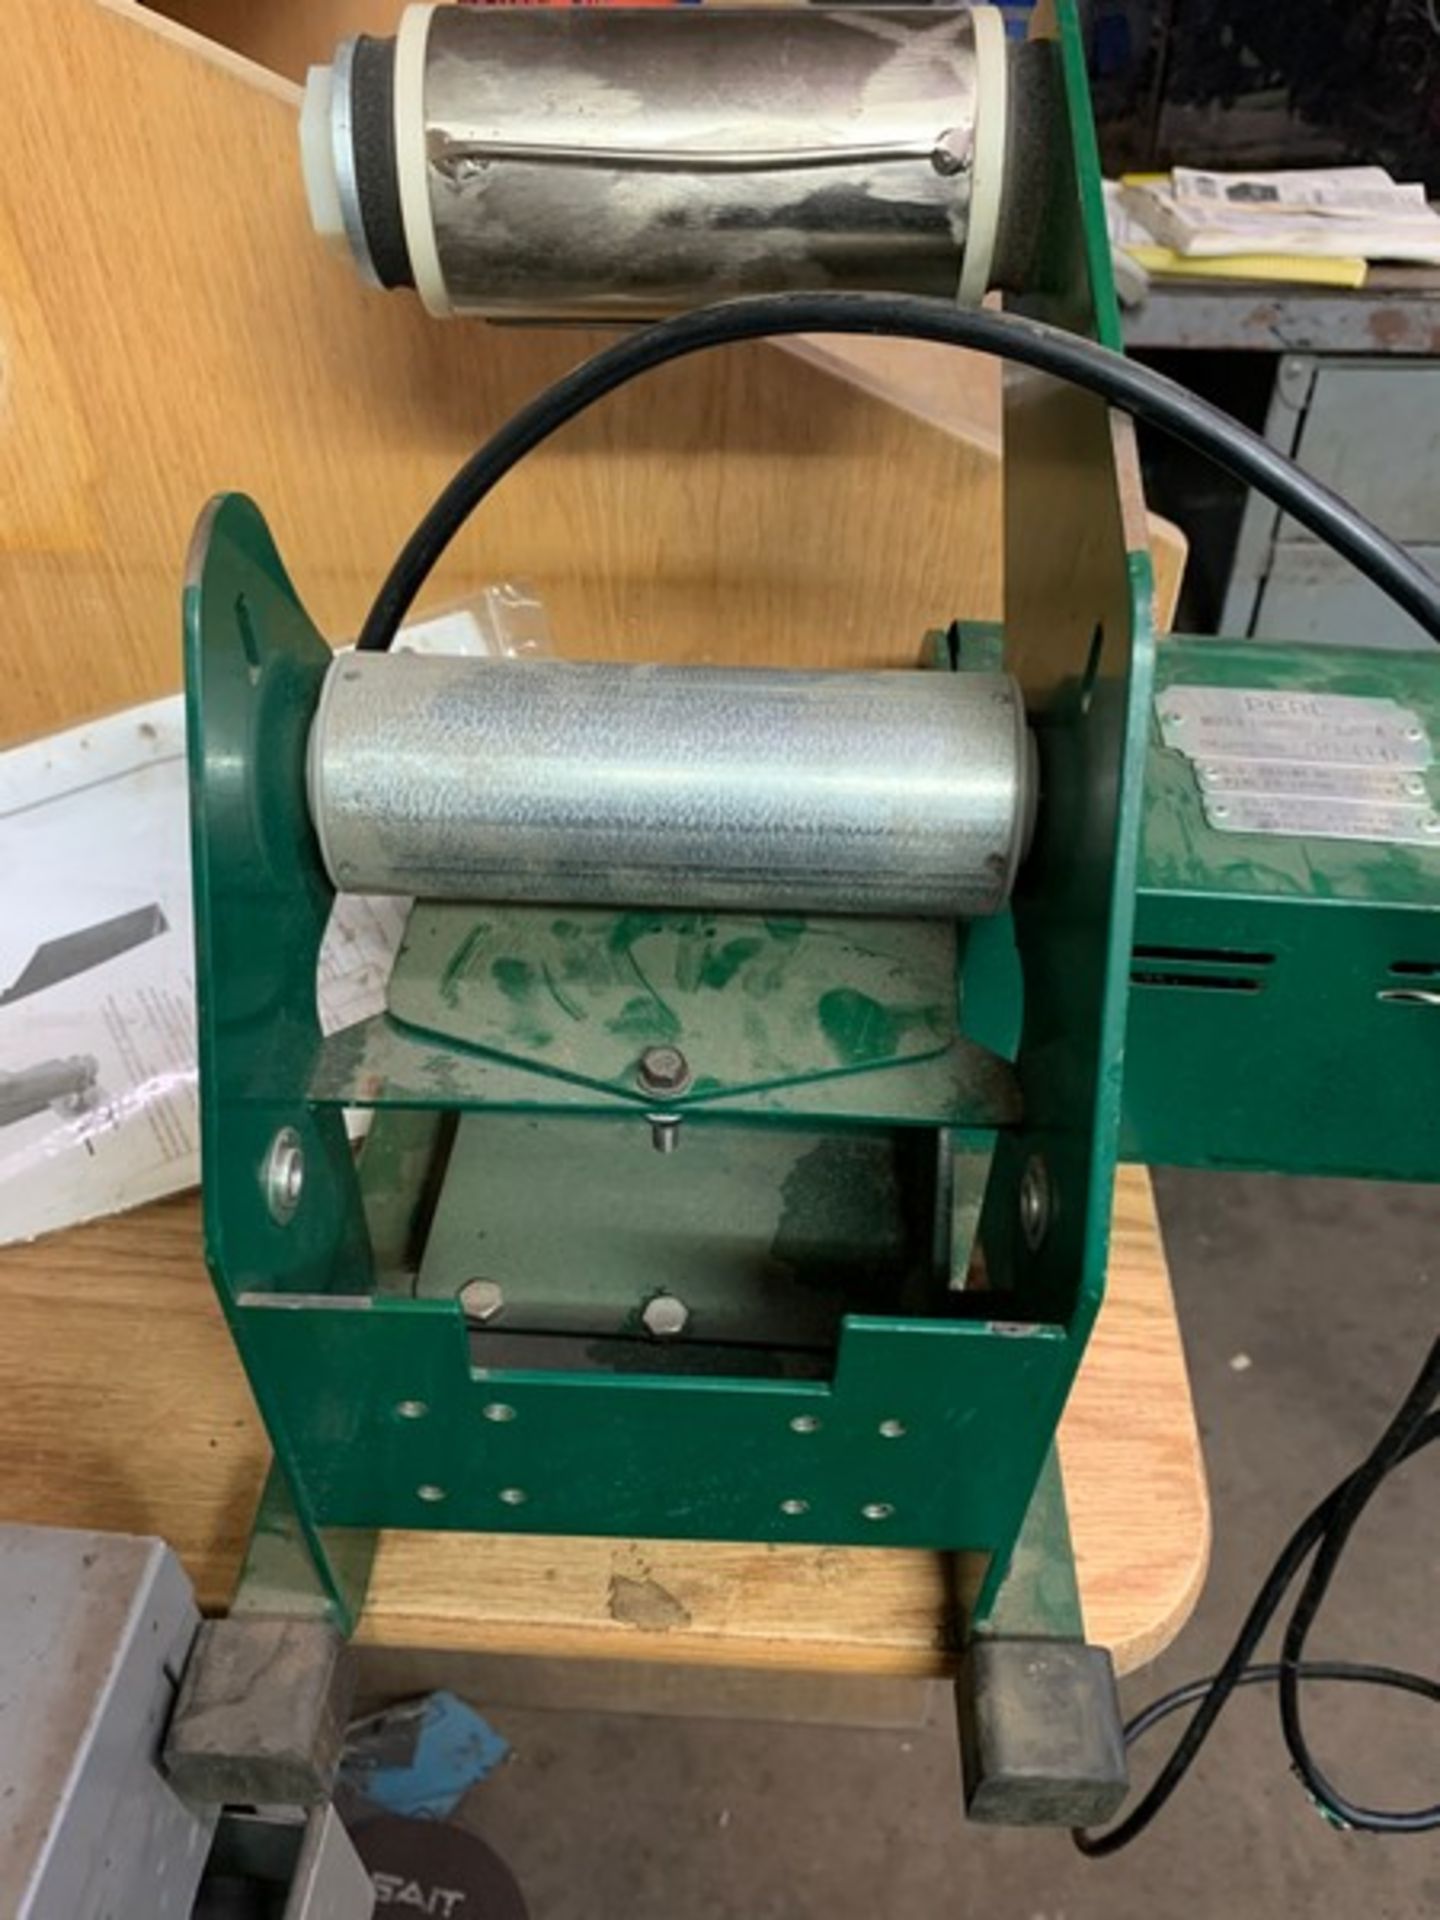 Tabletop Label Applicator The Green Machine - (Rigging and loading fees included in the selling